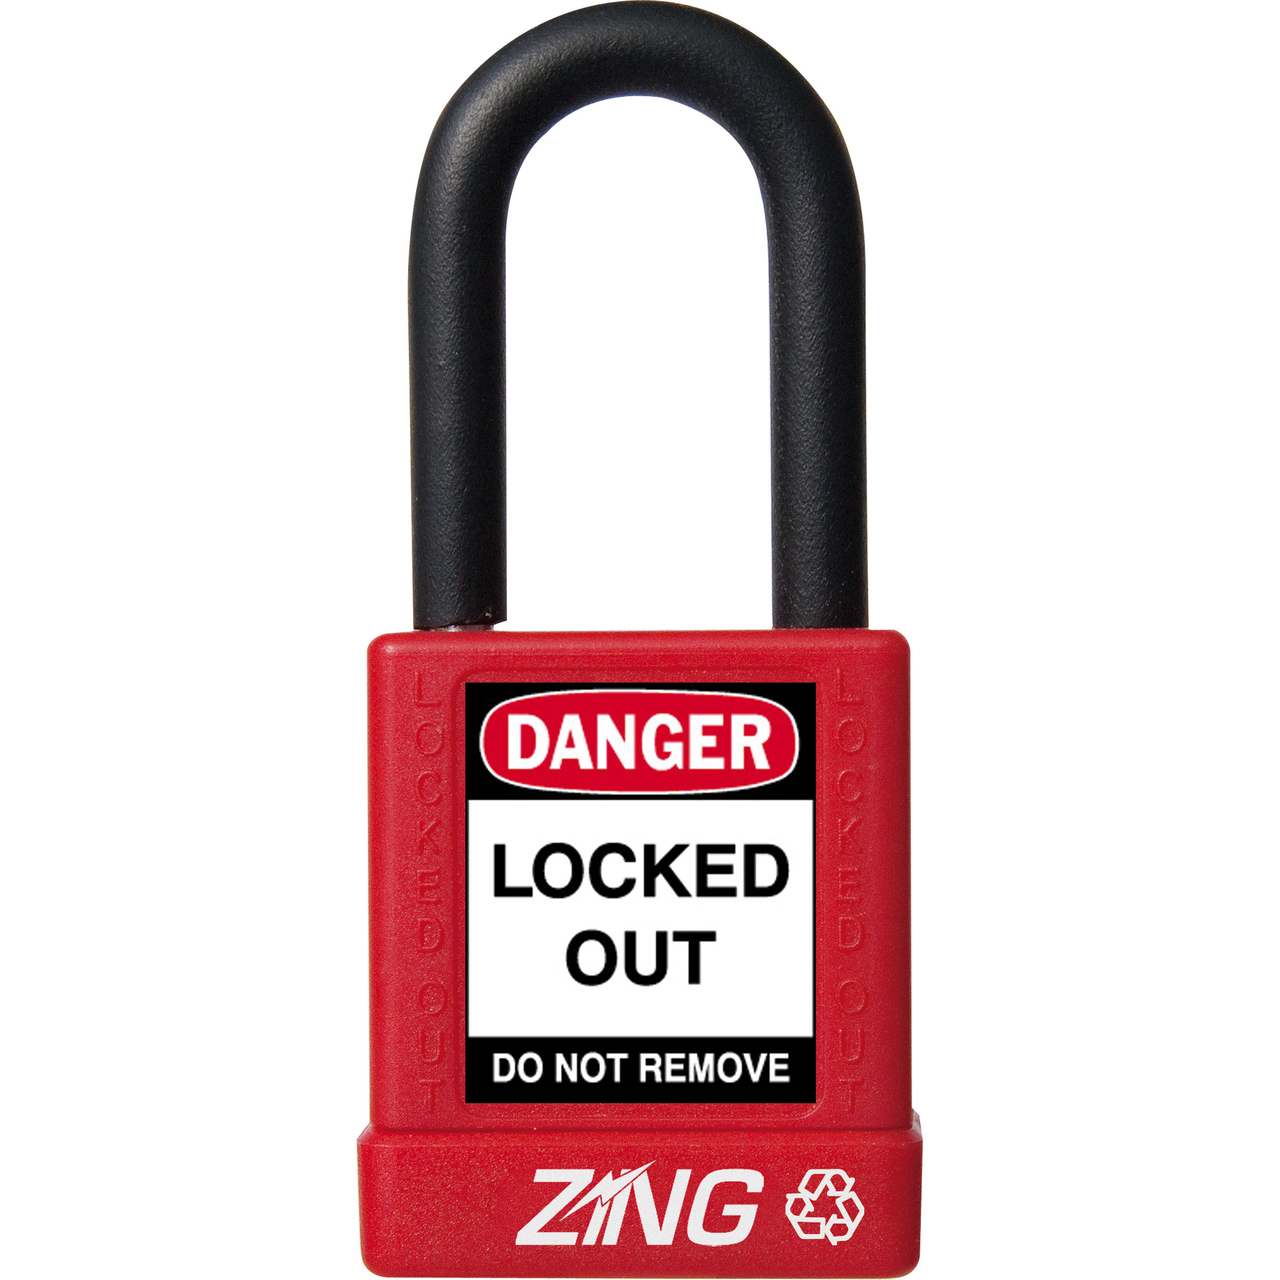 ZING RecycLock Safety Padlock, Keyed Different, 1-1/2" Shackle, 1-3/4" Body, Red